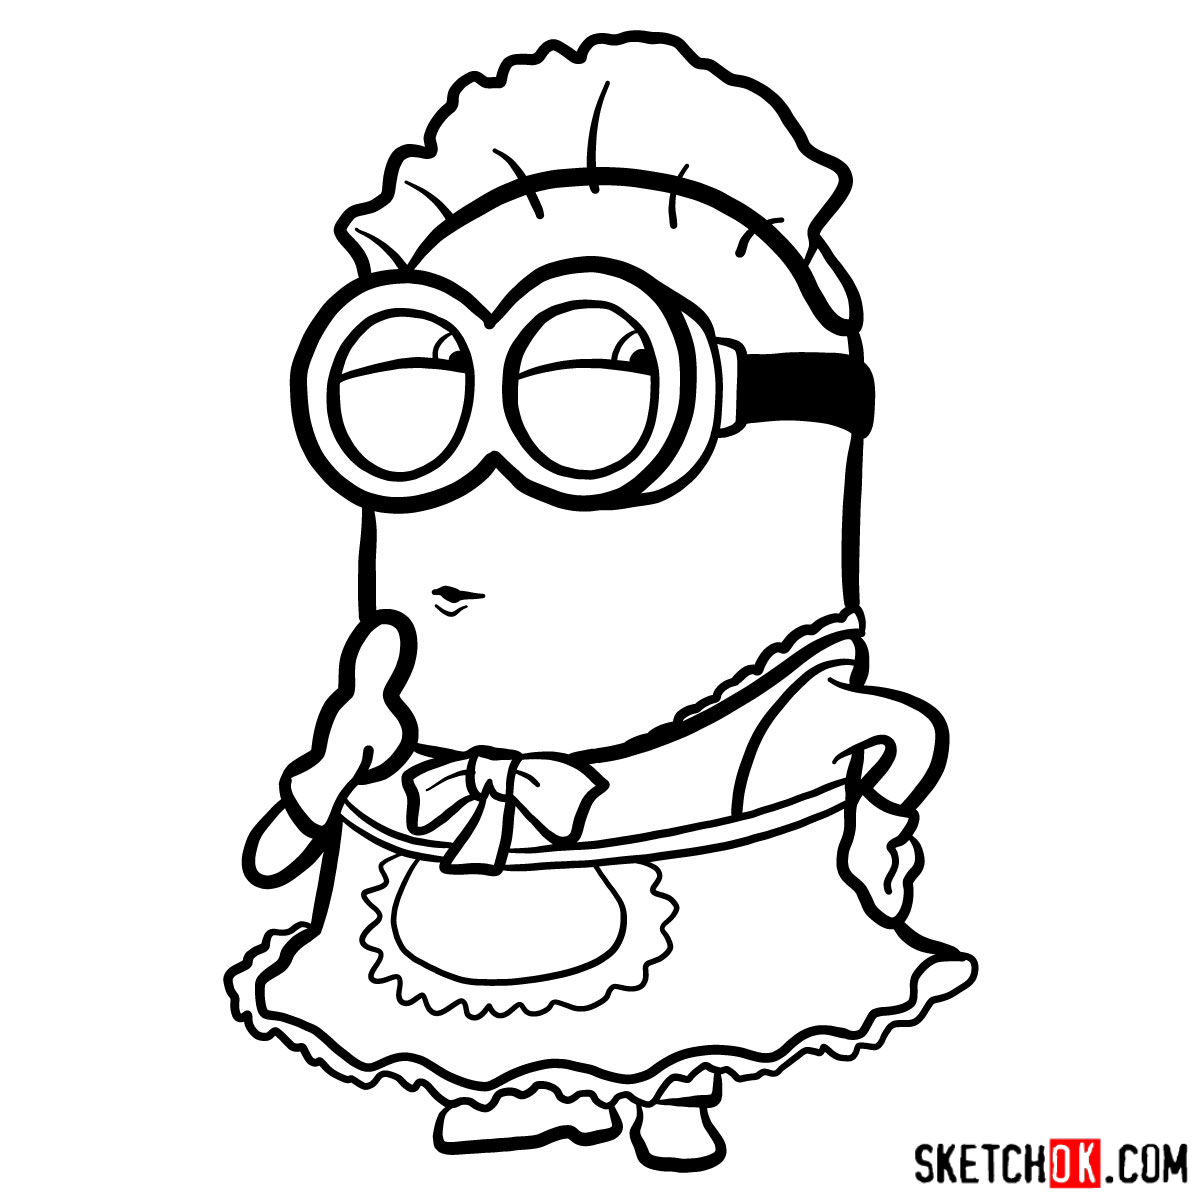 How to draw minion Phil in maid suit - step 11